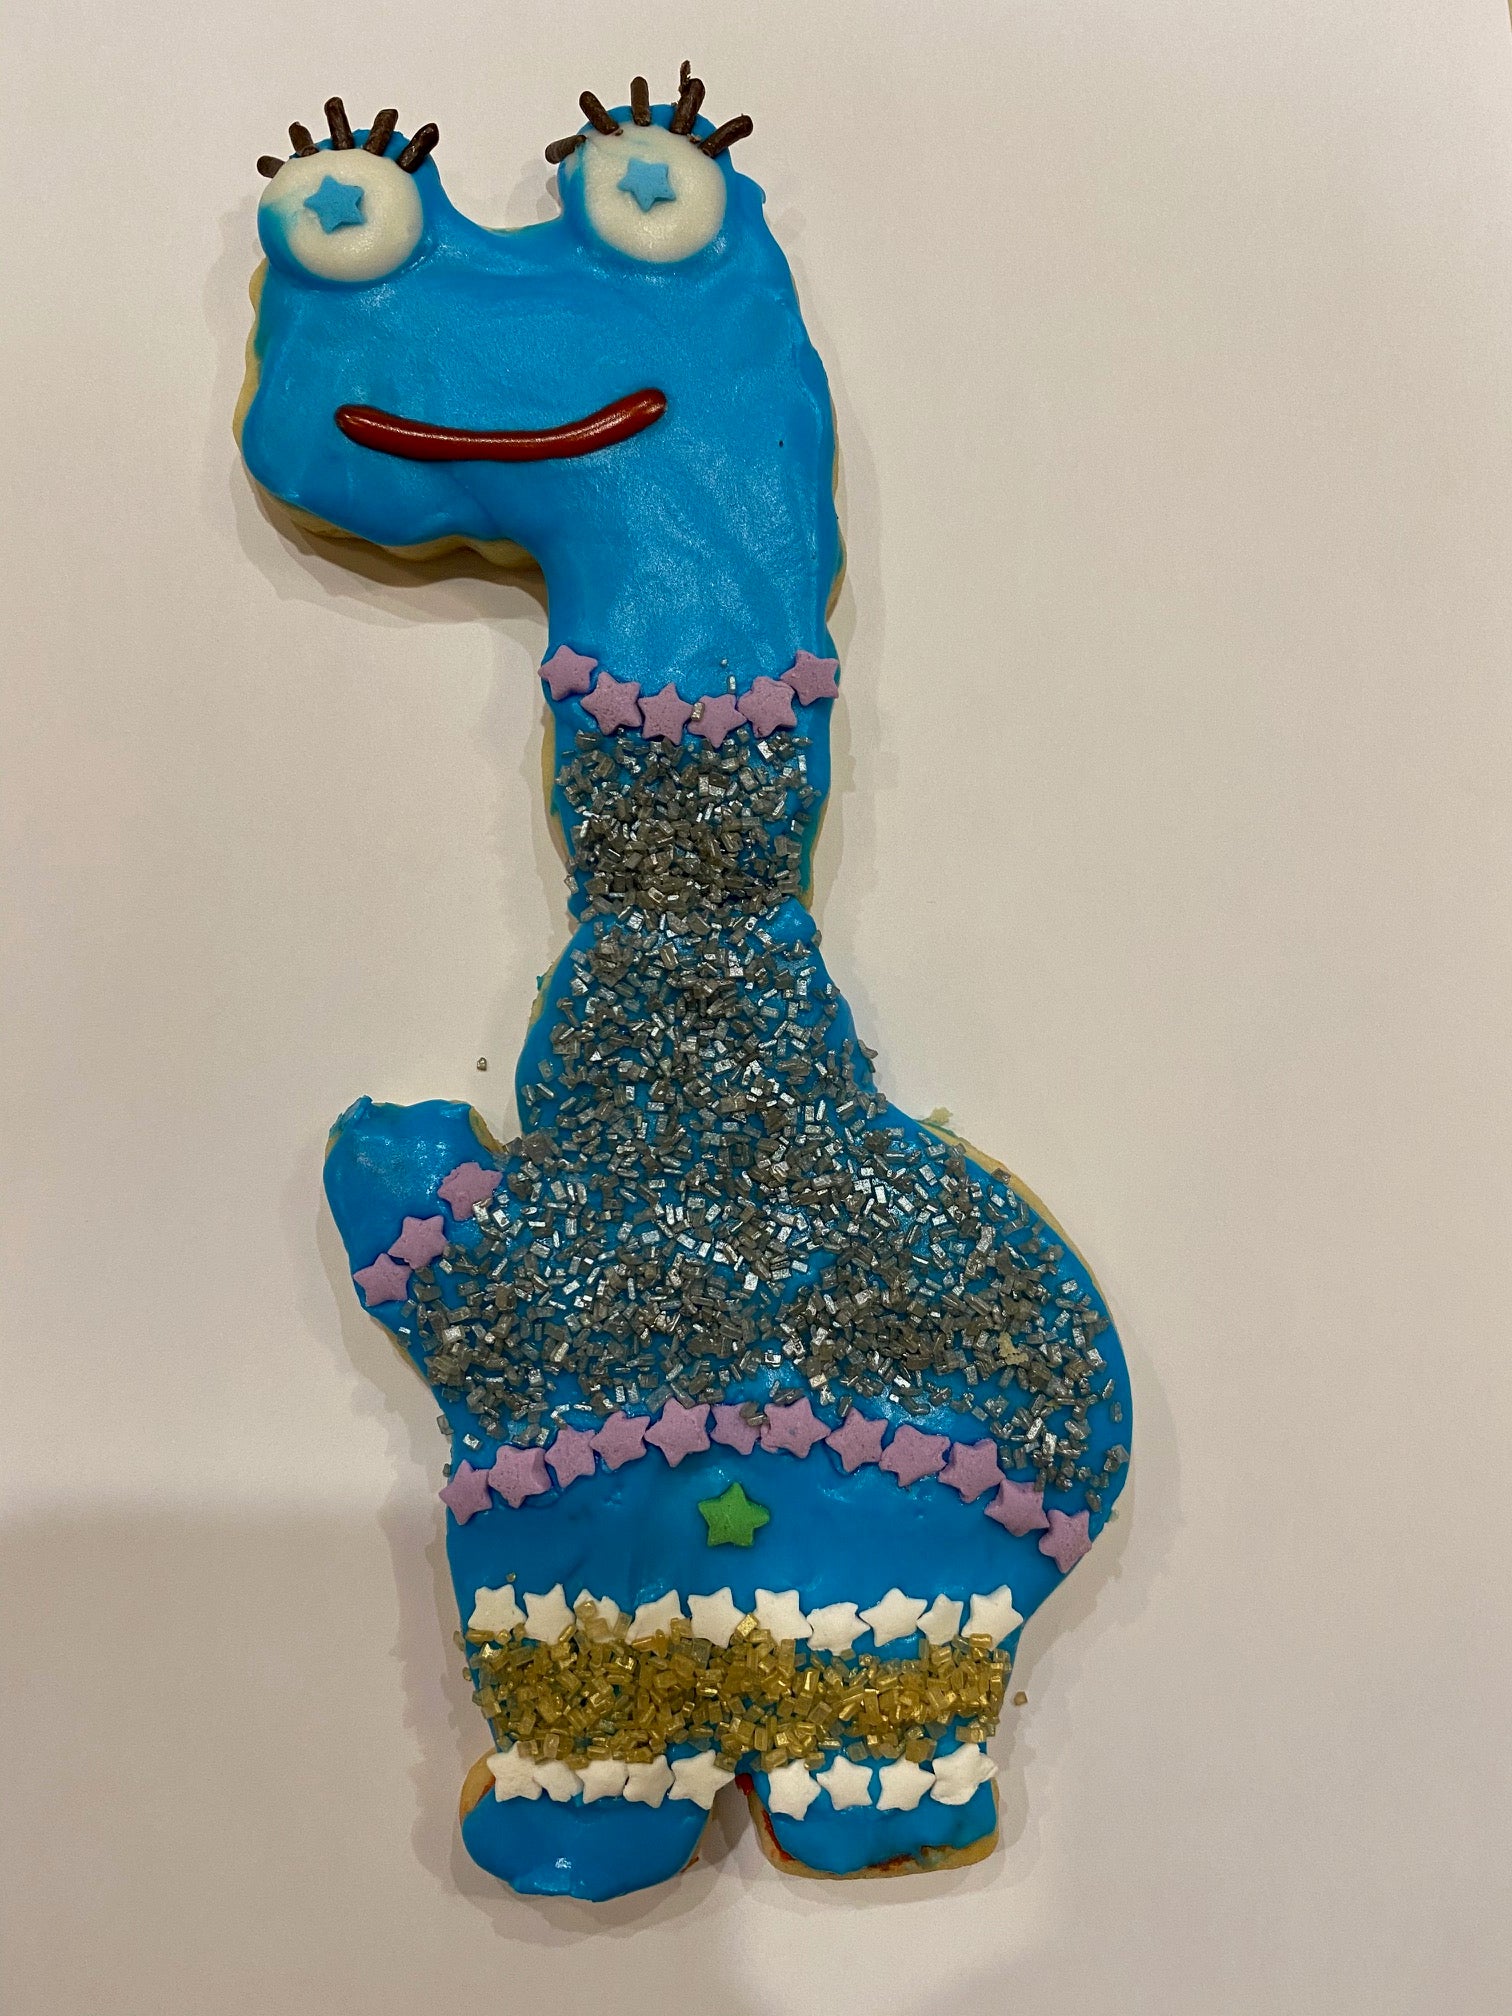 A decorated cookie